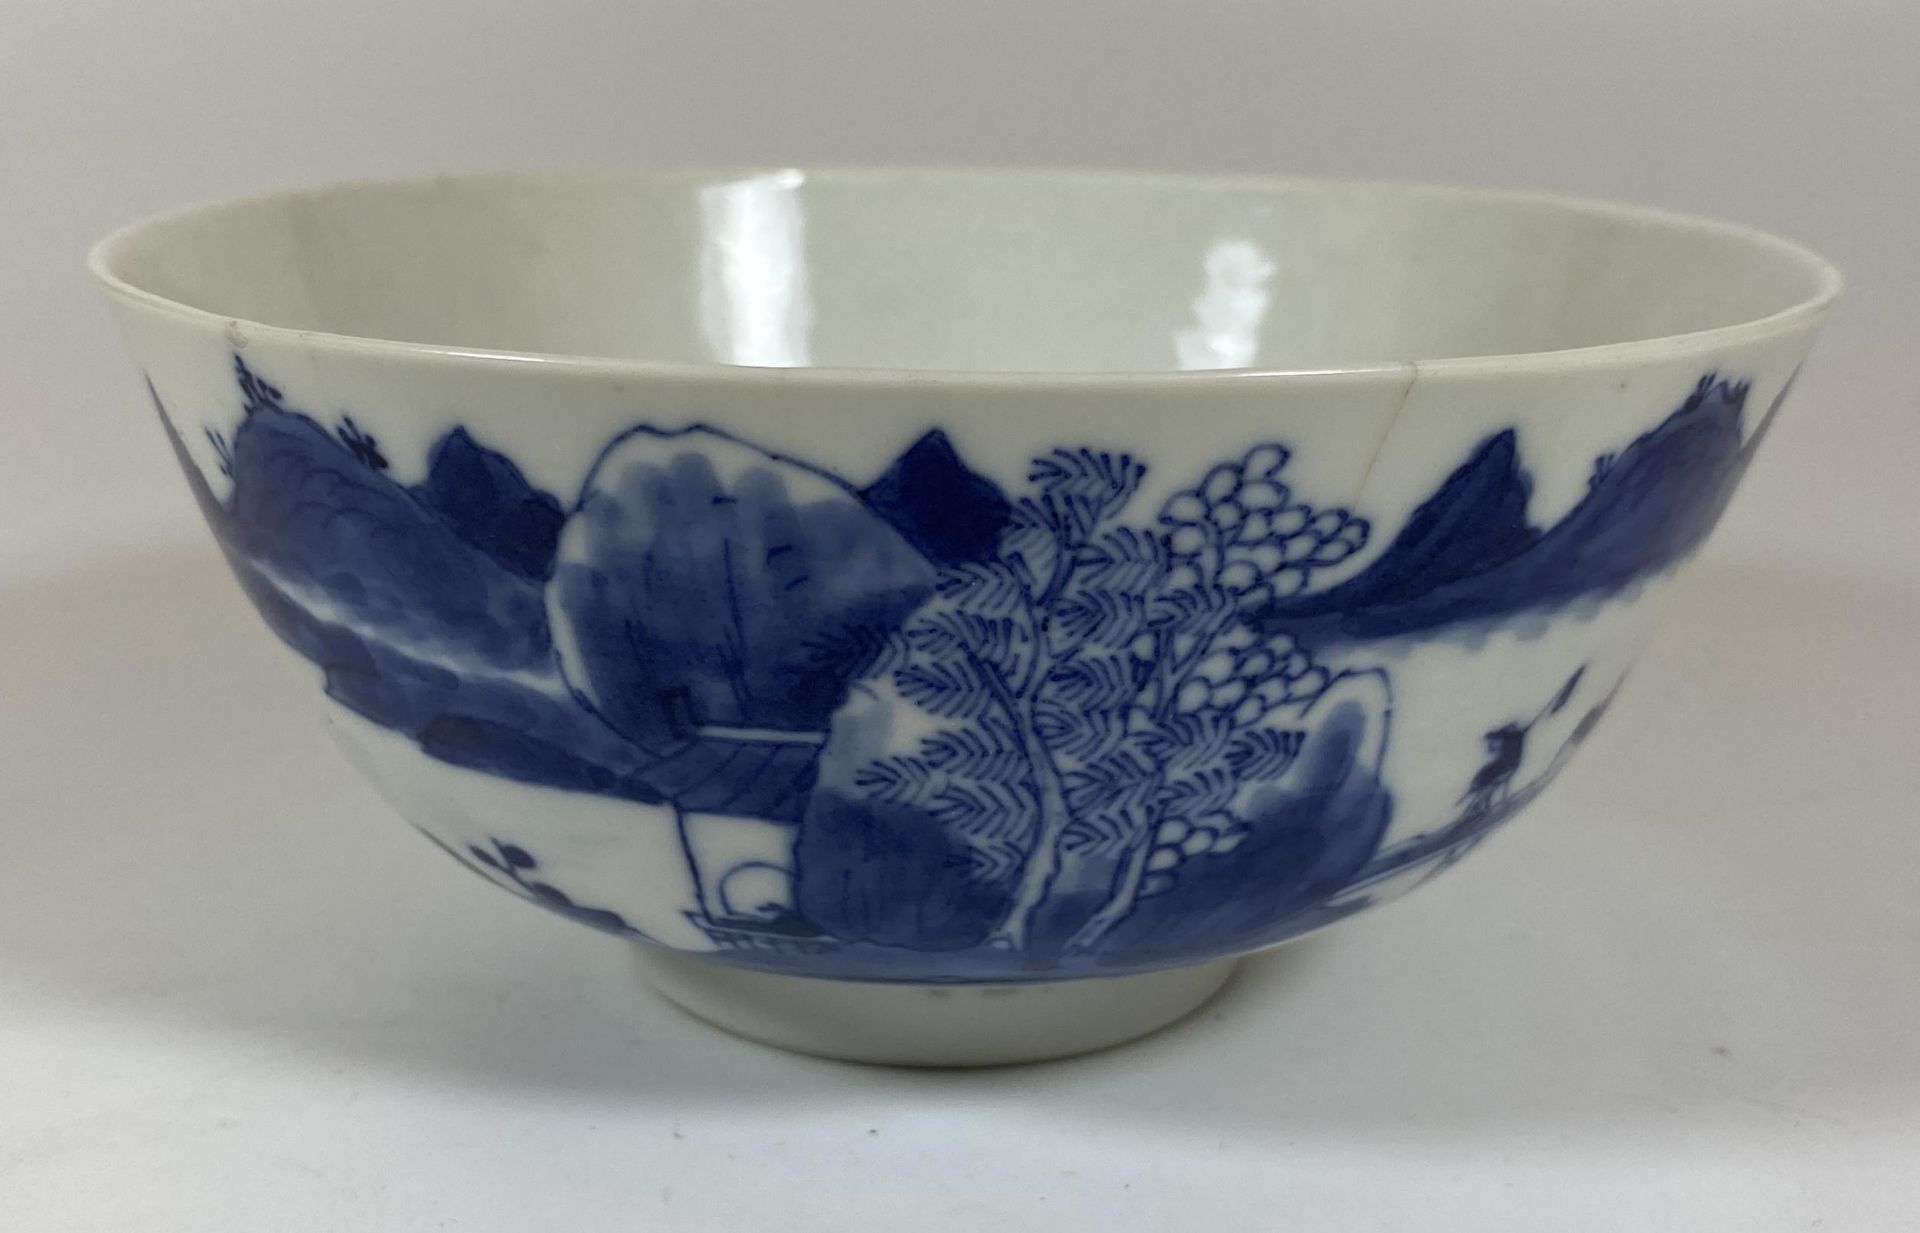 AN 18TH / 19TH CENTURY CHINESE BLUE AND WHITE PORCELAIN BOWL, FOUR CHARACTER MARK TO BASE,